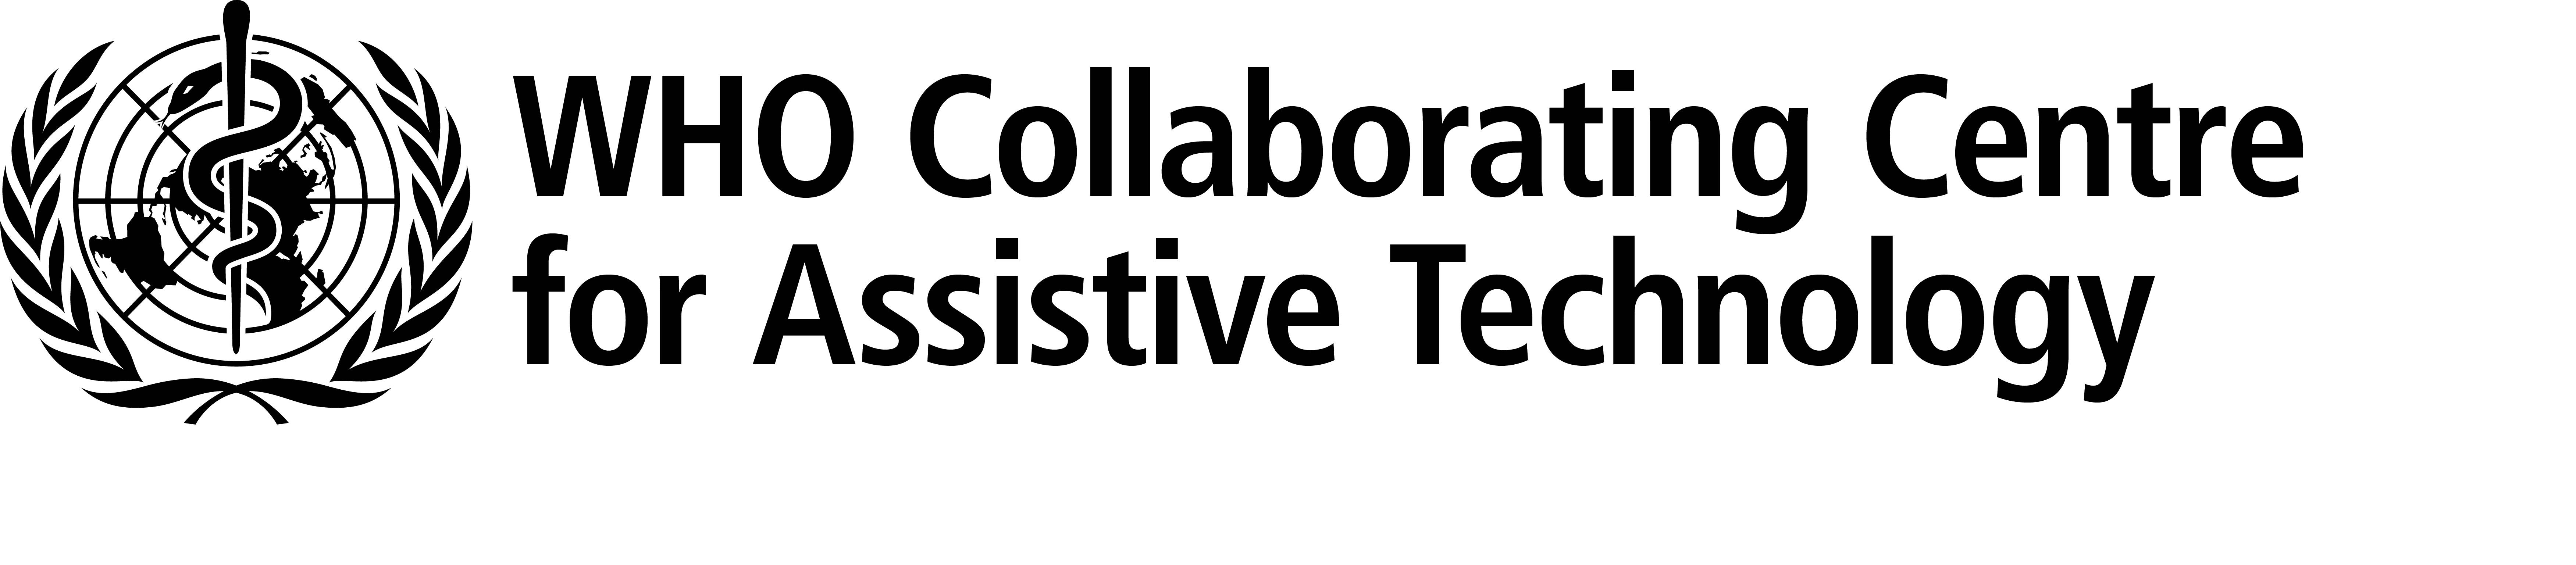 WHO Collaborating Centre for Assistive Technology Logo